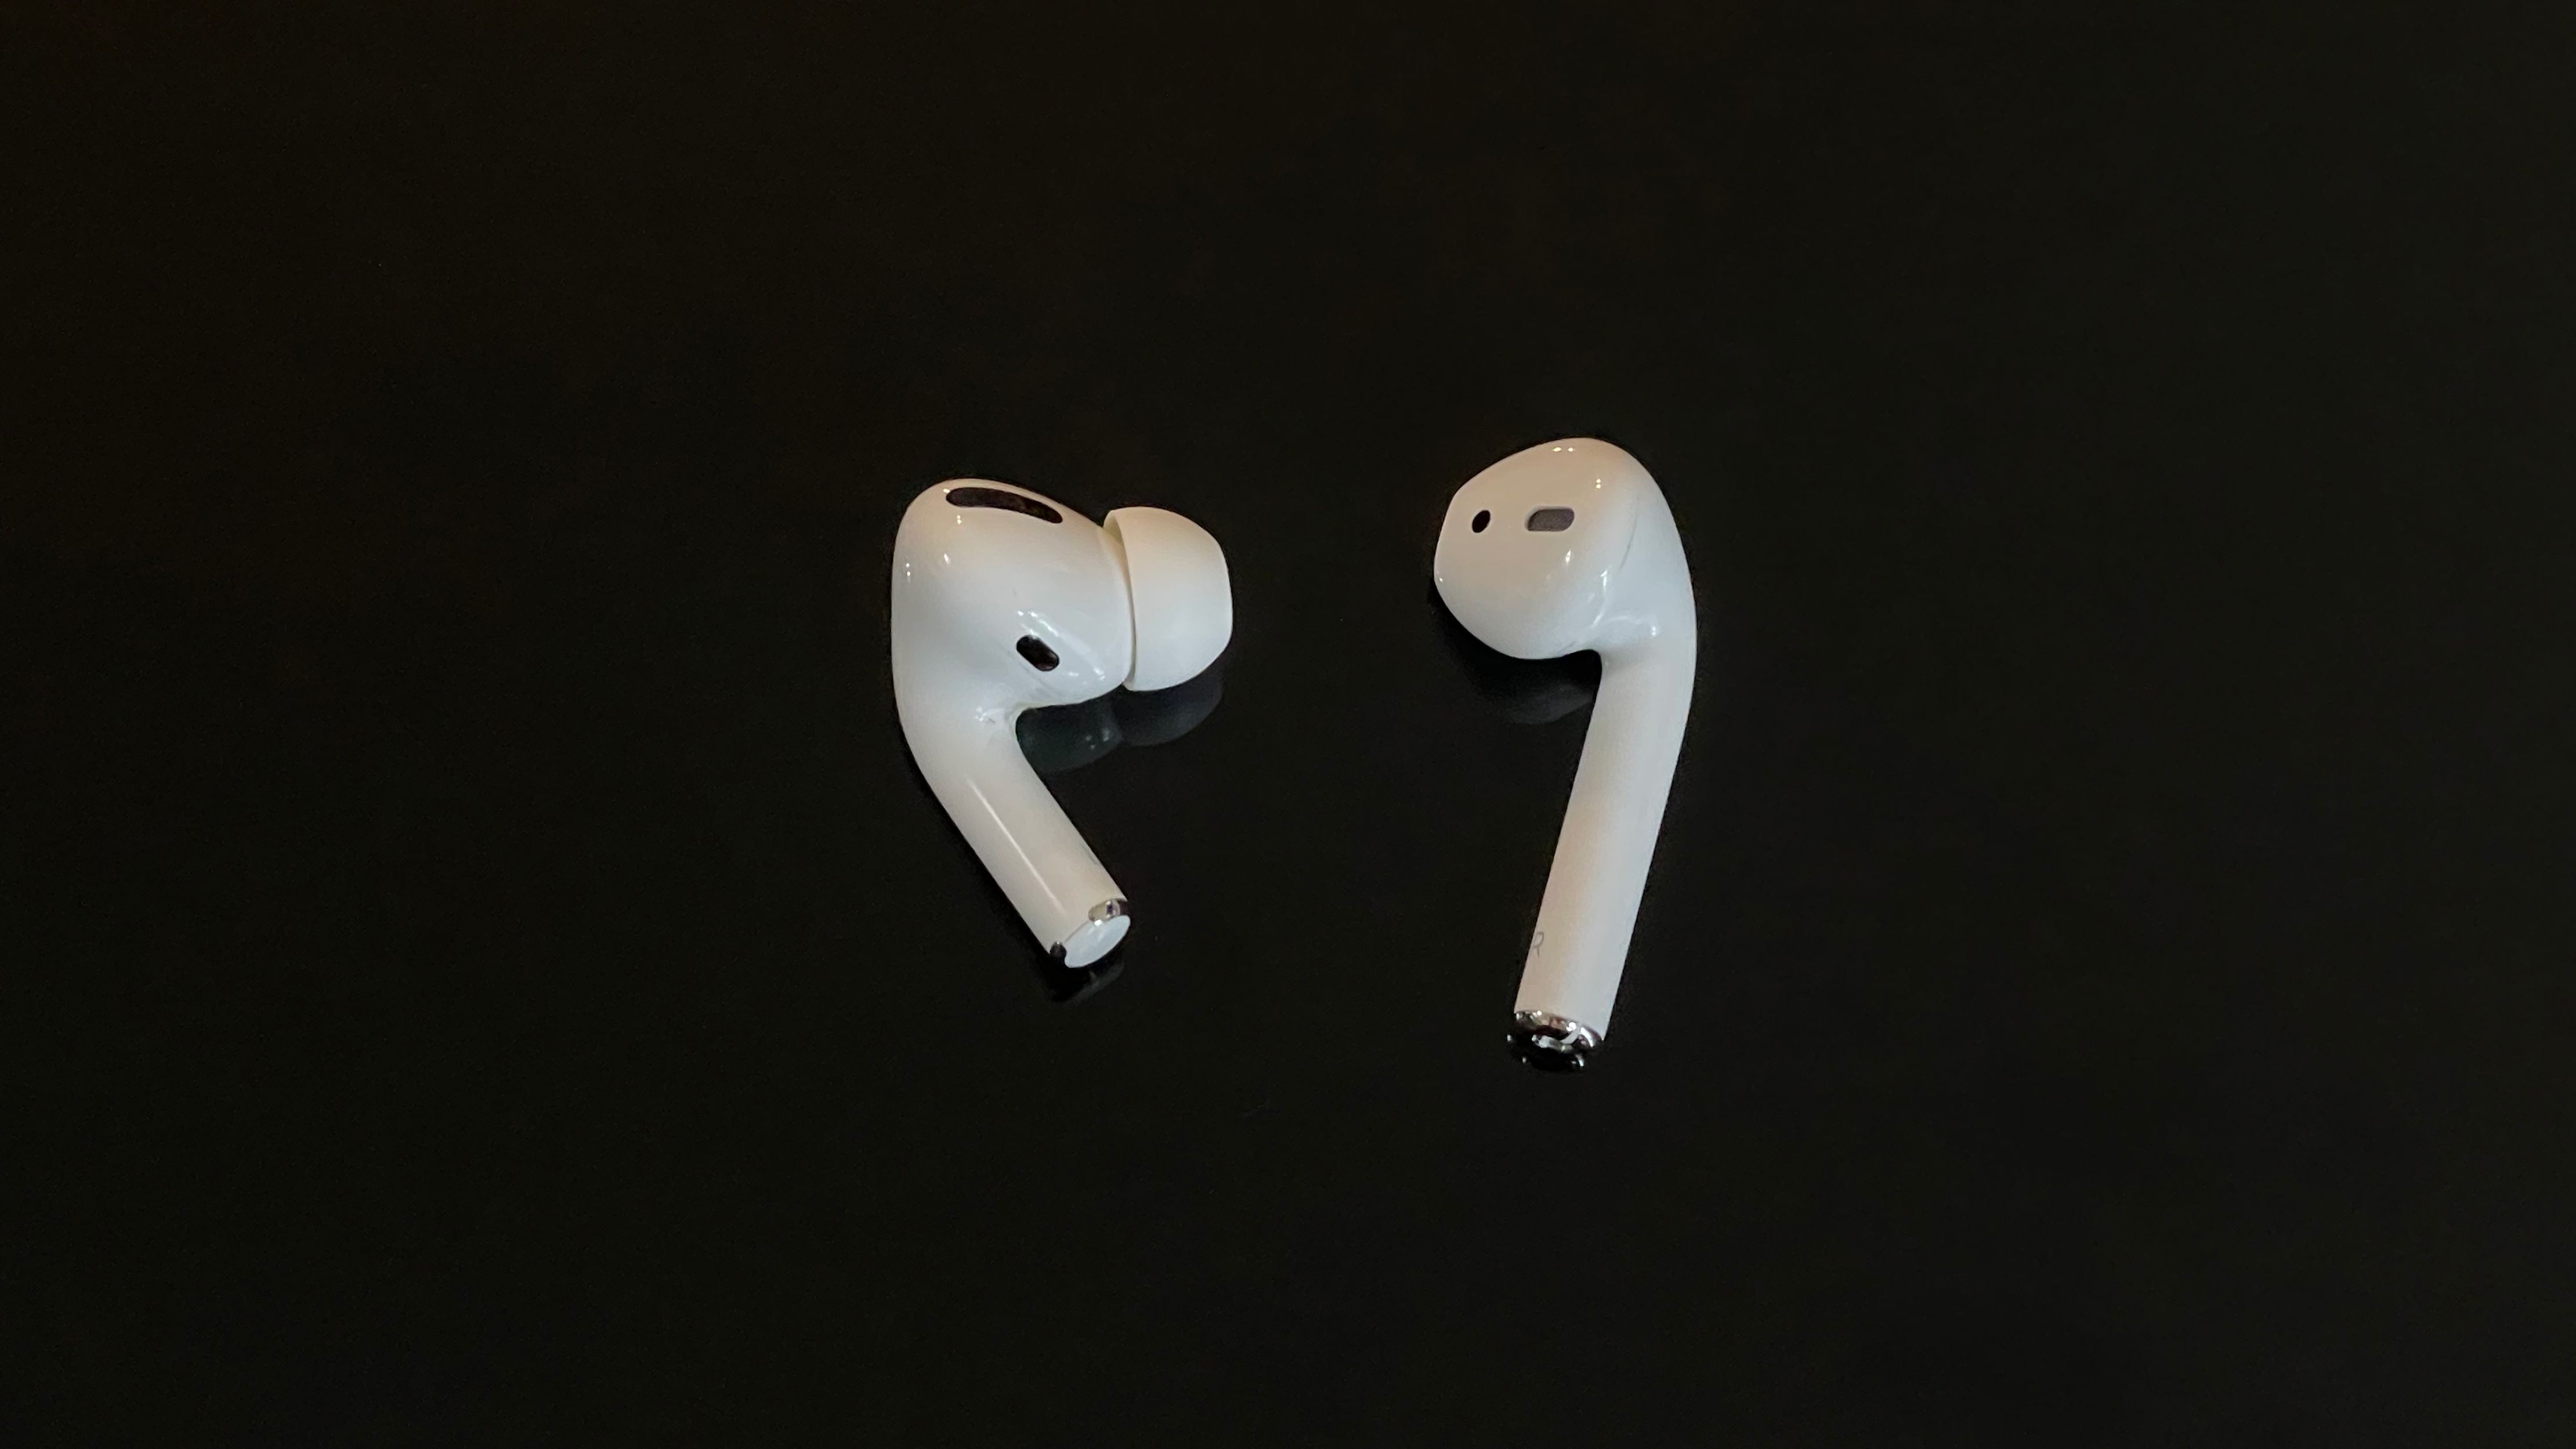 How to replace a lost AirPod or earbud